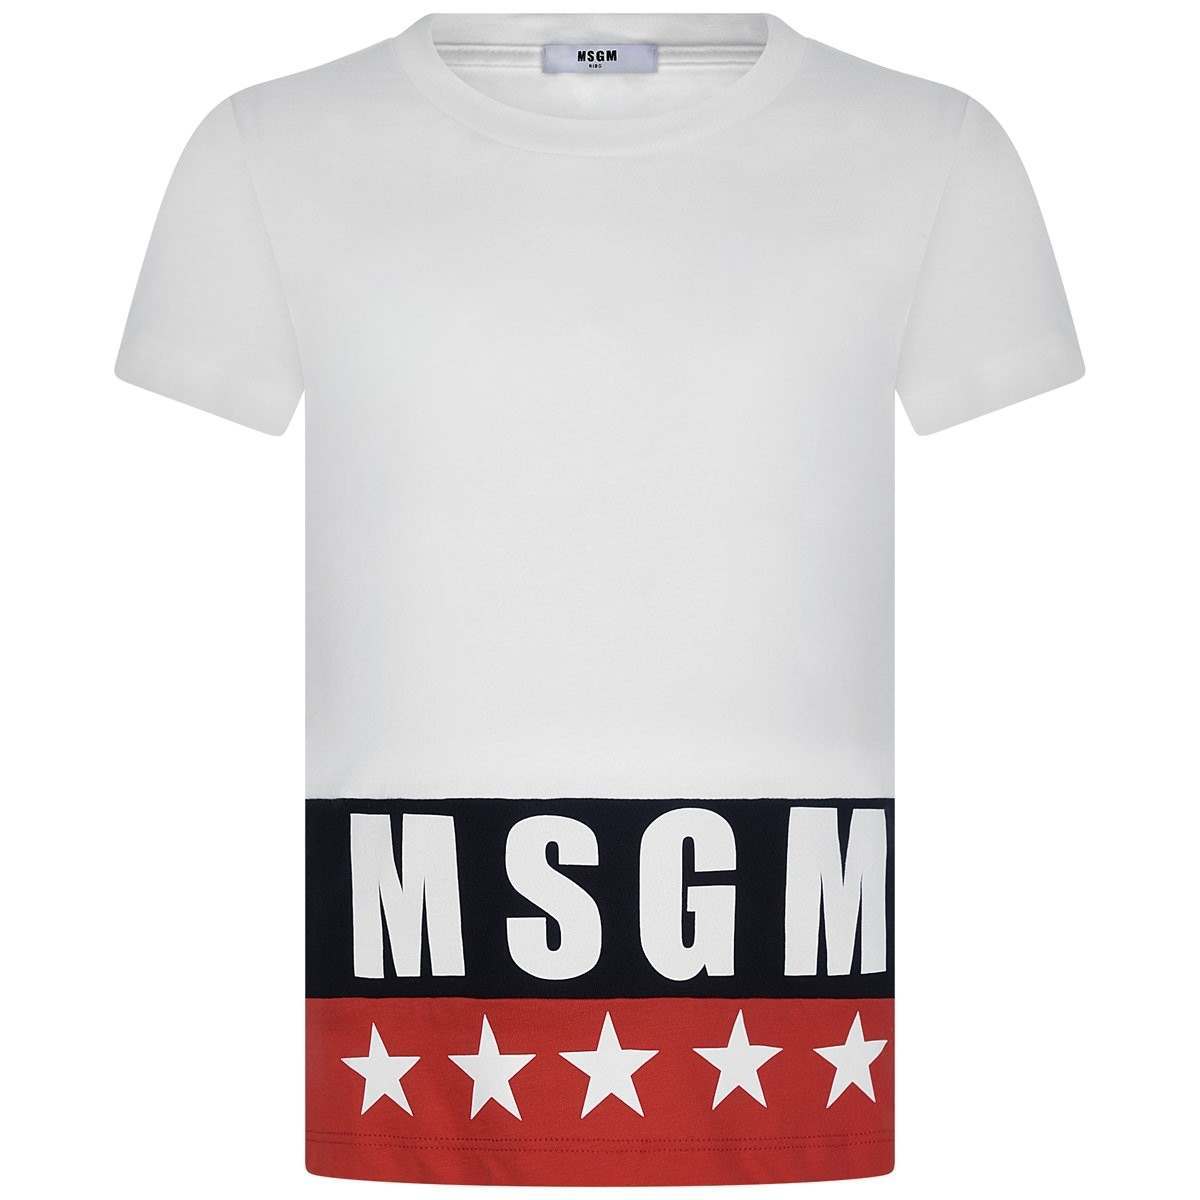 White and Red Star Logo - MSGM Boys White & Red Star Logo Top